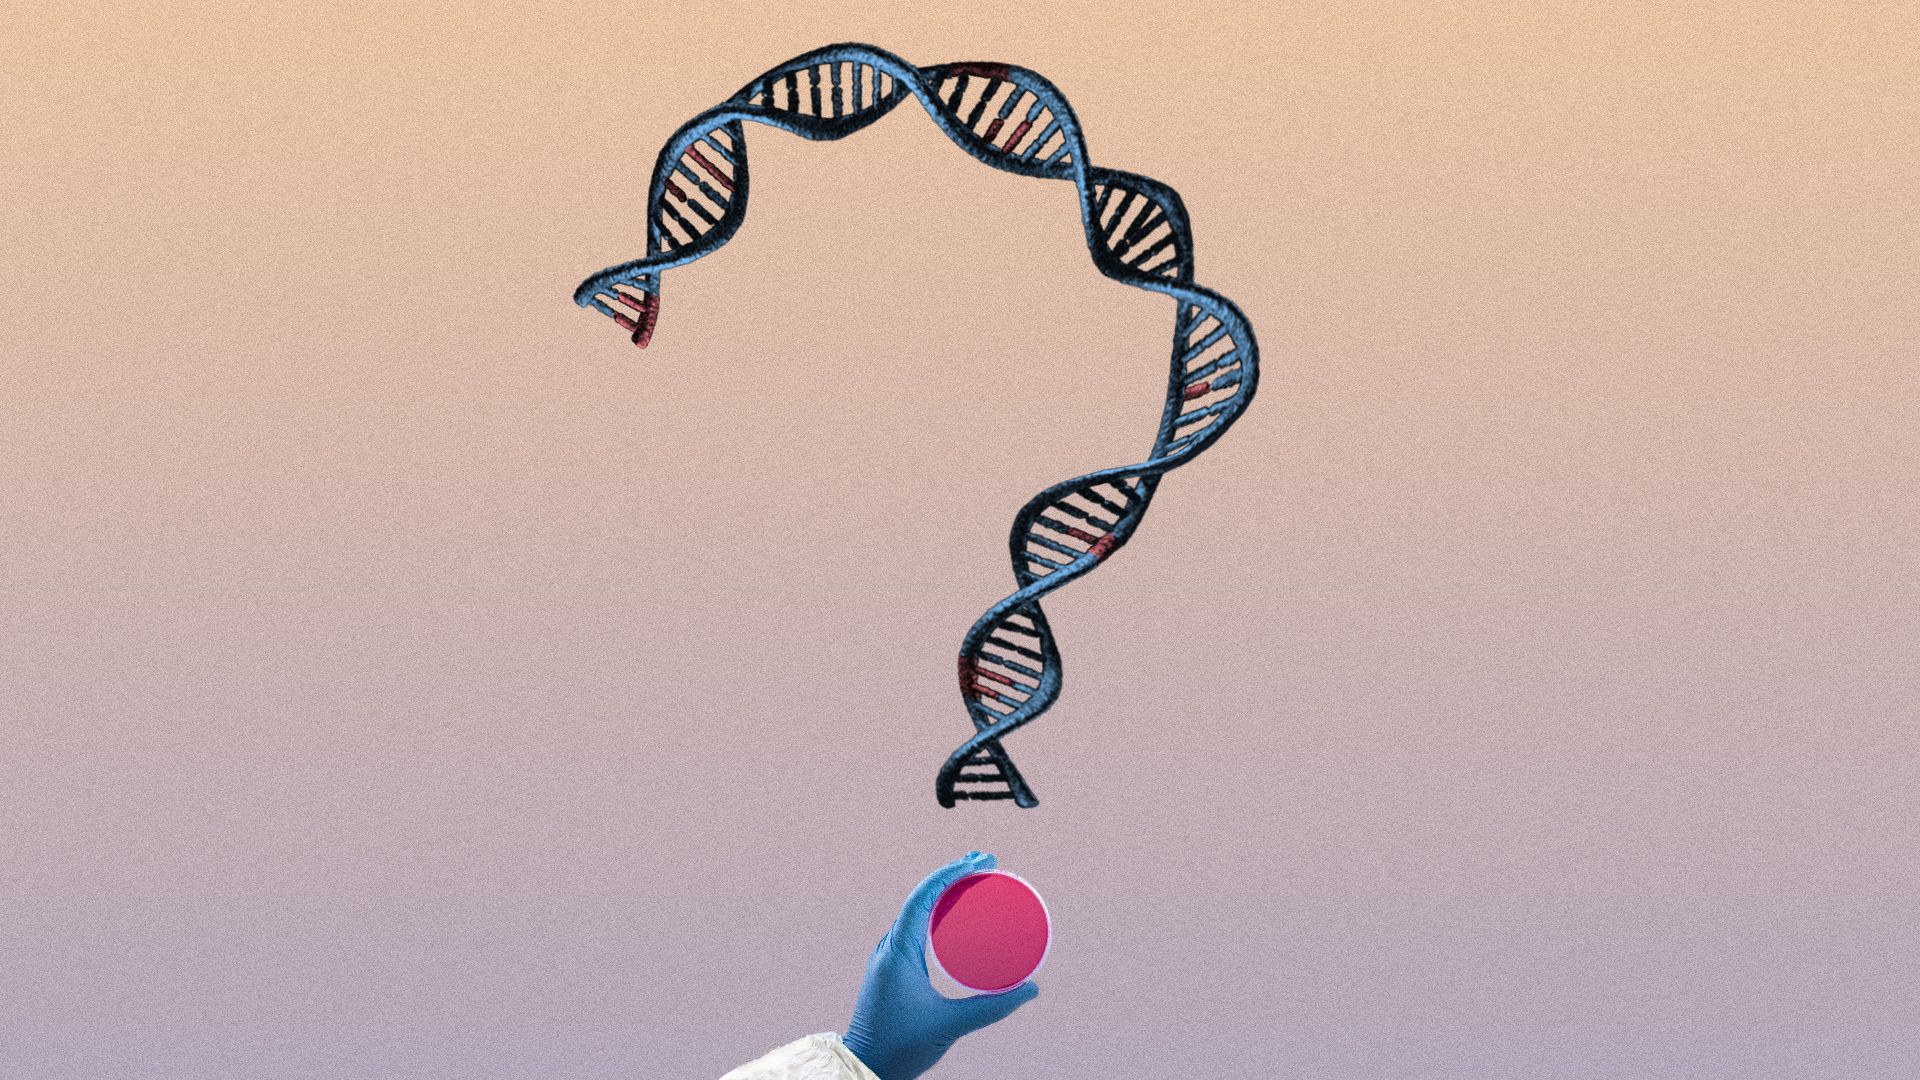 Illustration of a double stranded DNA formed into the shape of a question mark